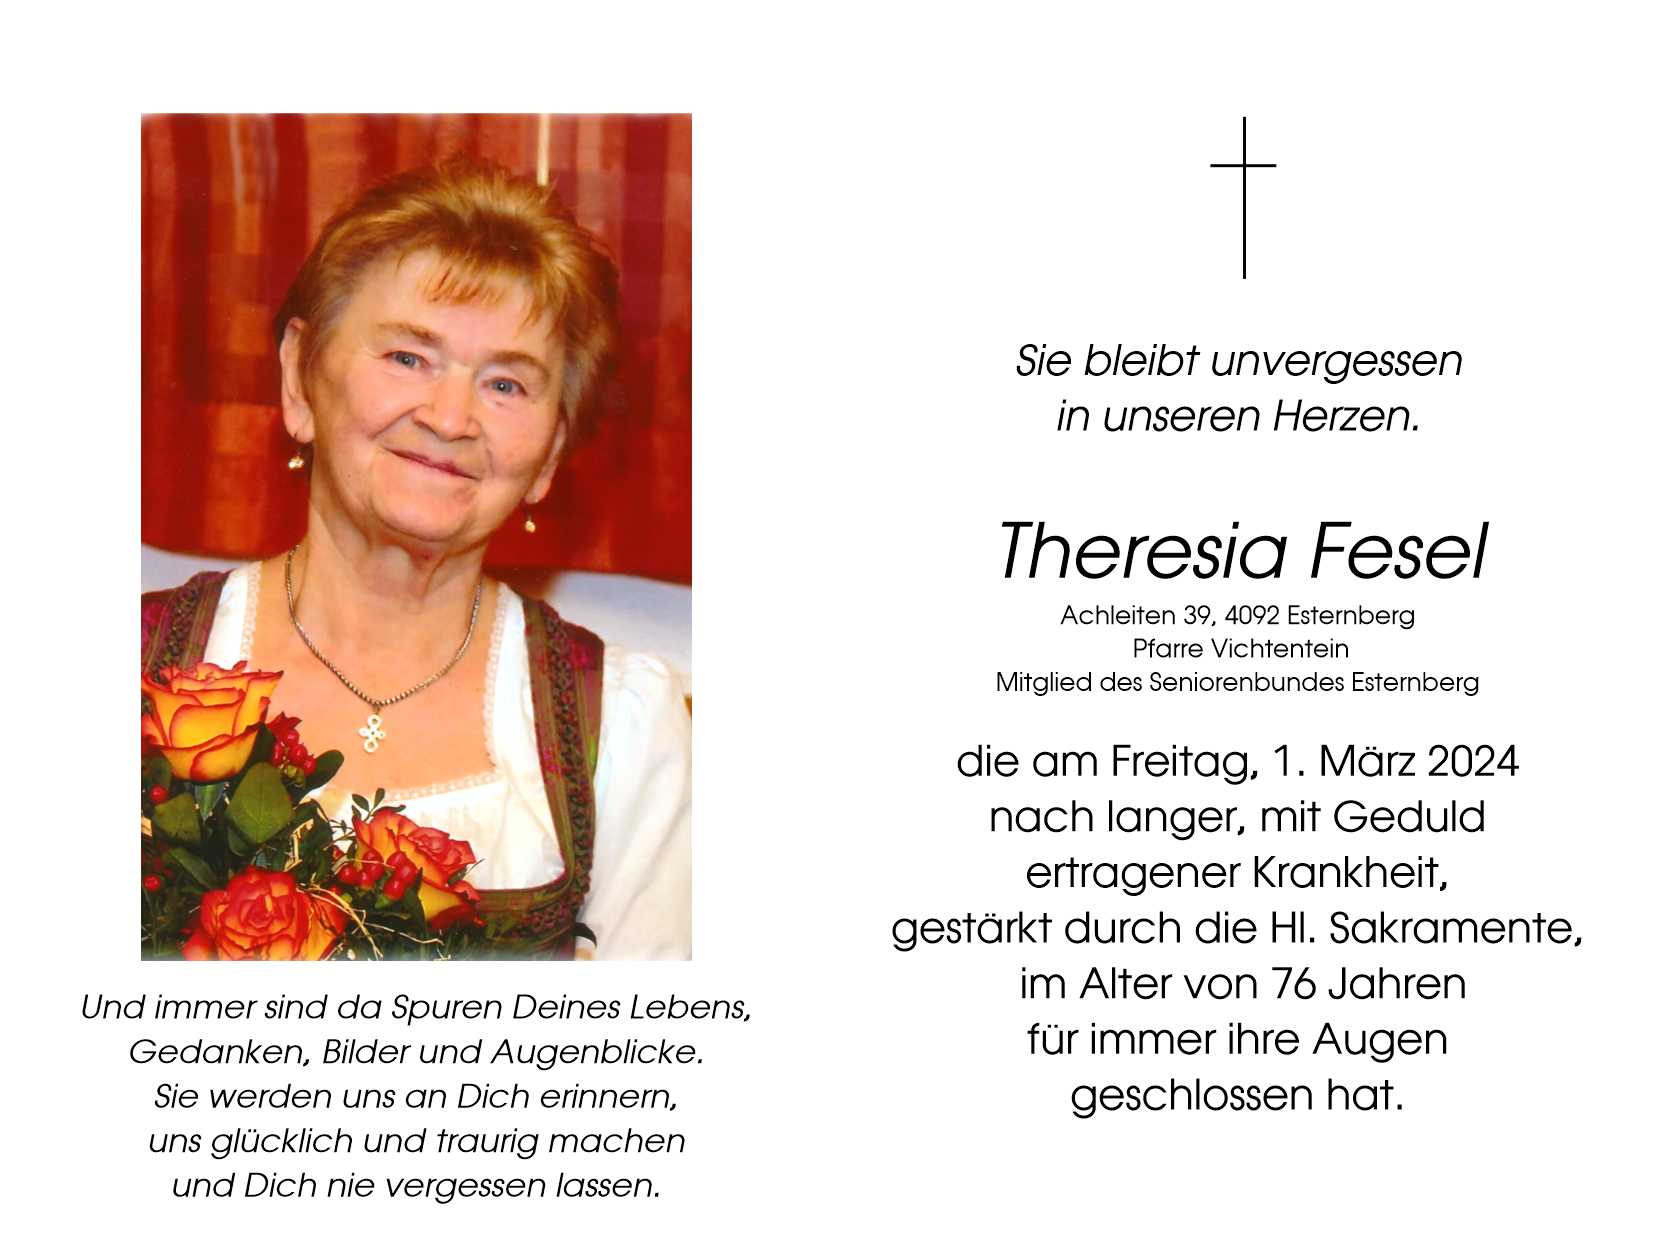 Theresia  Fesel